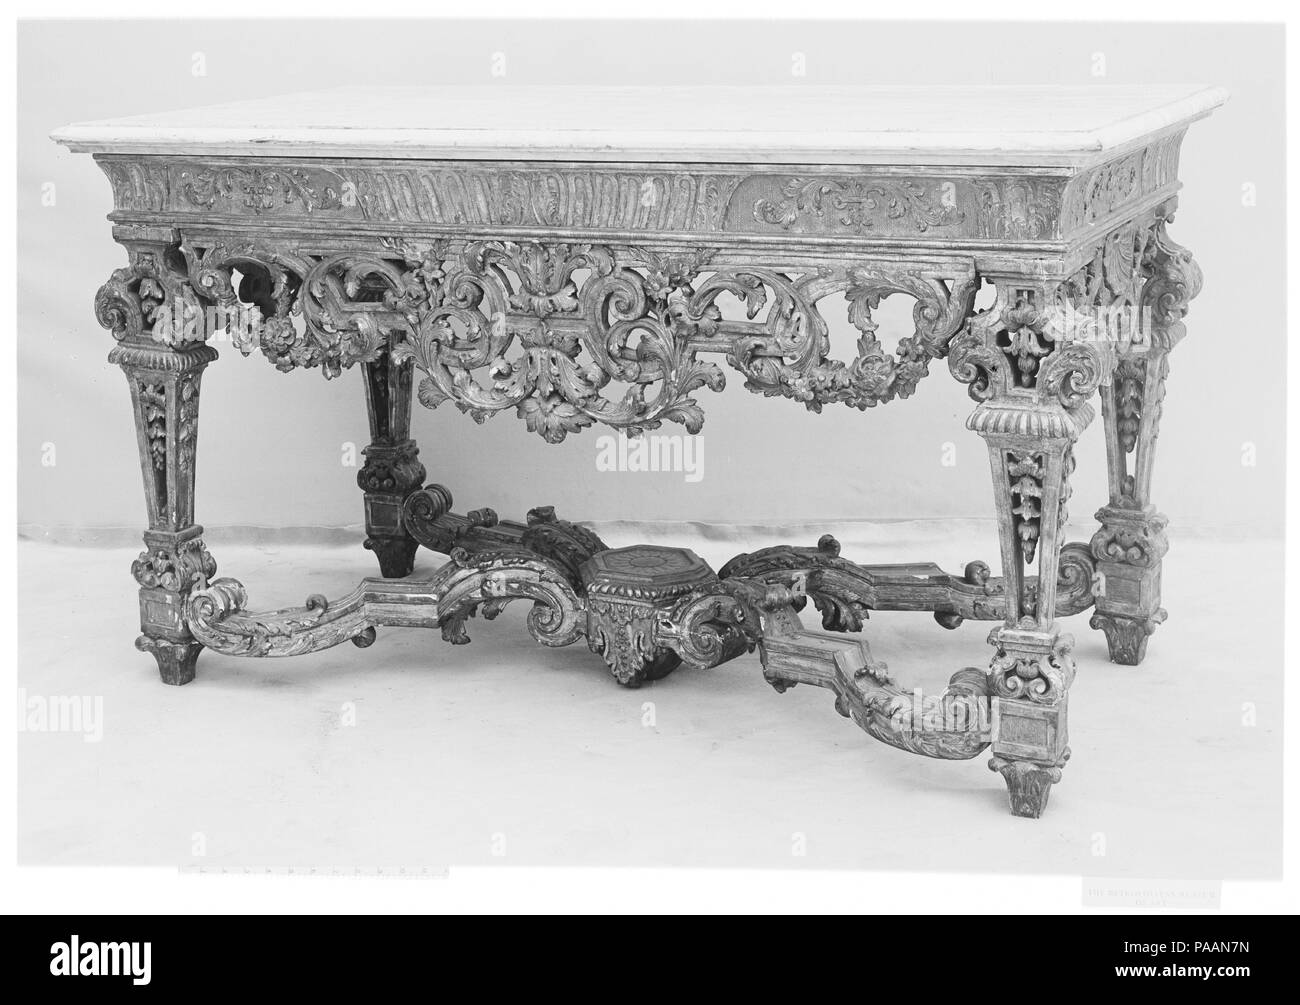 Table. Culture: French. Dimensions: 31 1/2 x 58 x 26 3/4 in. (80 x 147.3 x  67.9cm). Date: late 17th century. With its openwork decoration and X-shaped  stretcher, this table bears a